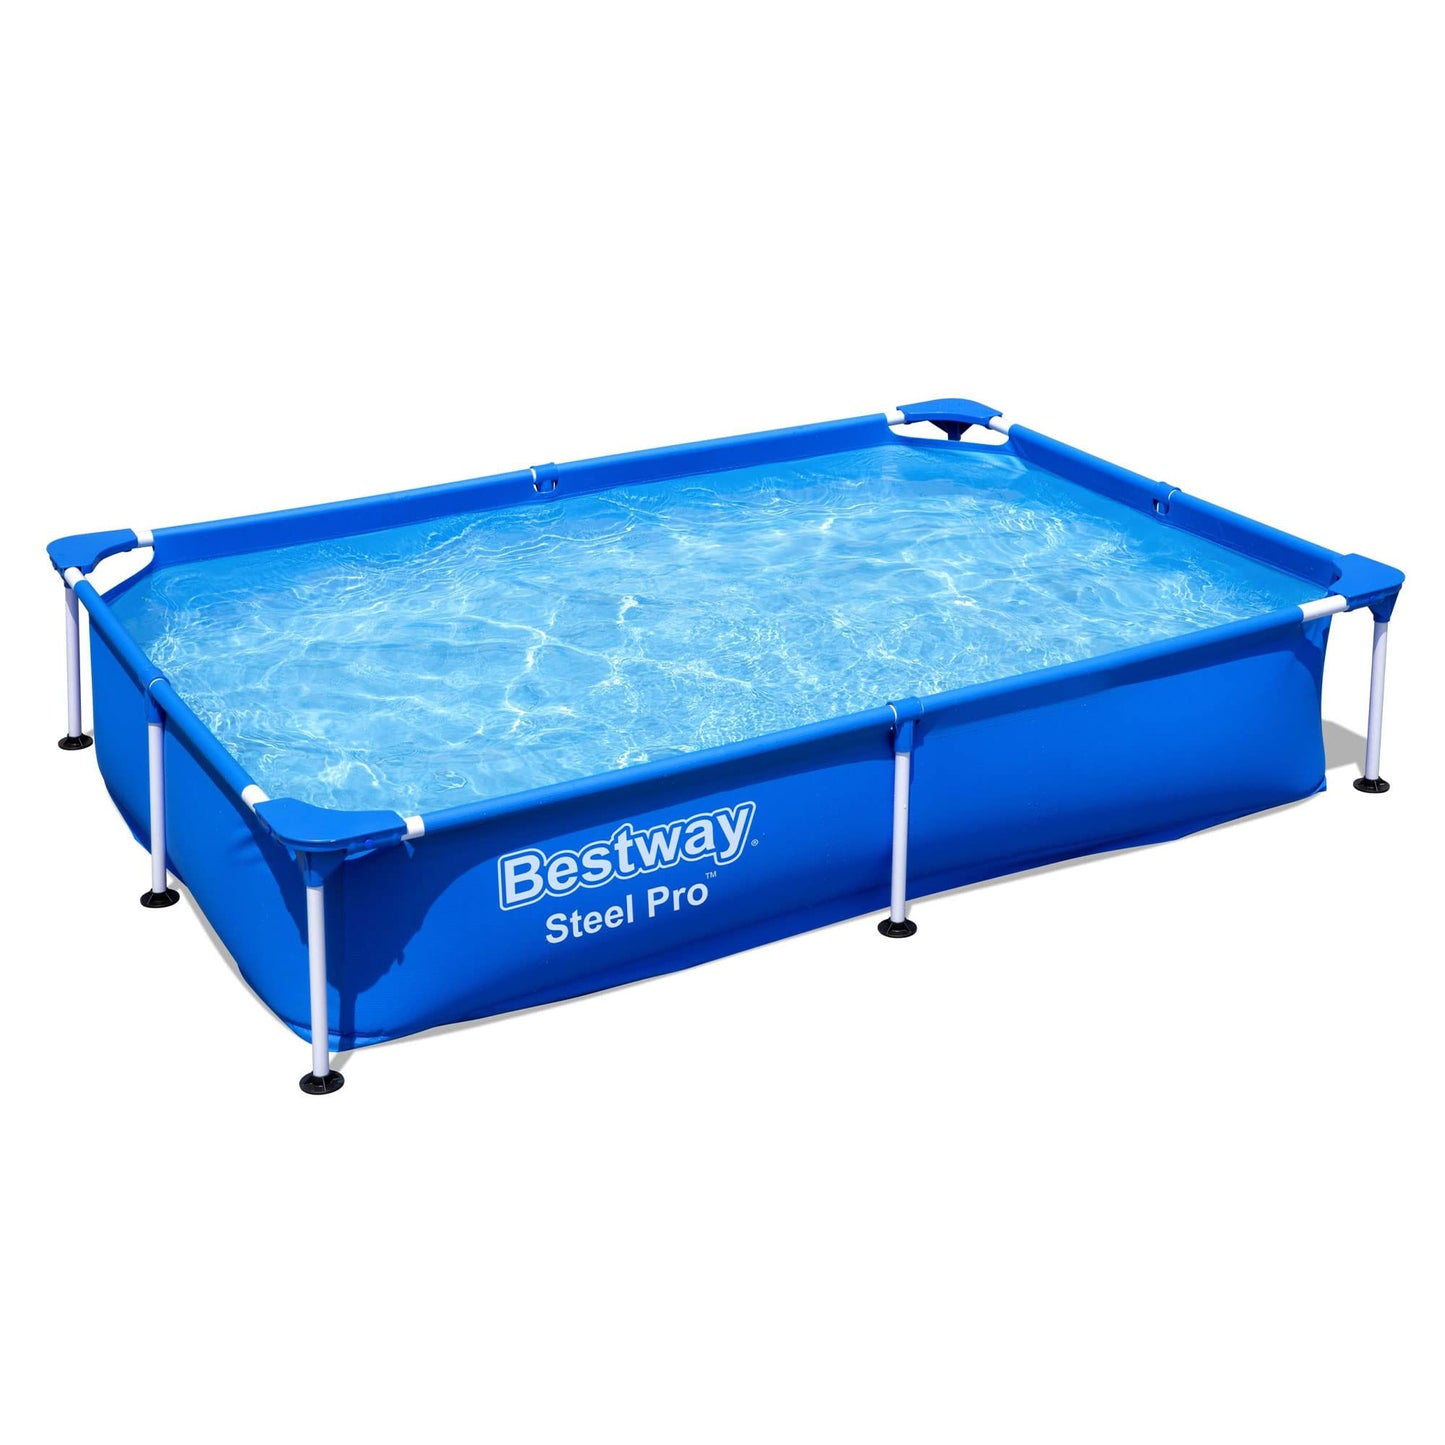 Bestway Steel Pro 87 Inch x 59 Inch x 17 Inch Rectangular Metal Frame Above Ground Outdoor Backyard Swimming Pool, Blue (Pool Only) 7.25' x 4.9' x 17"